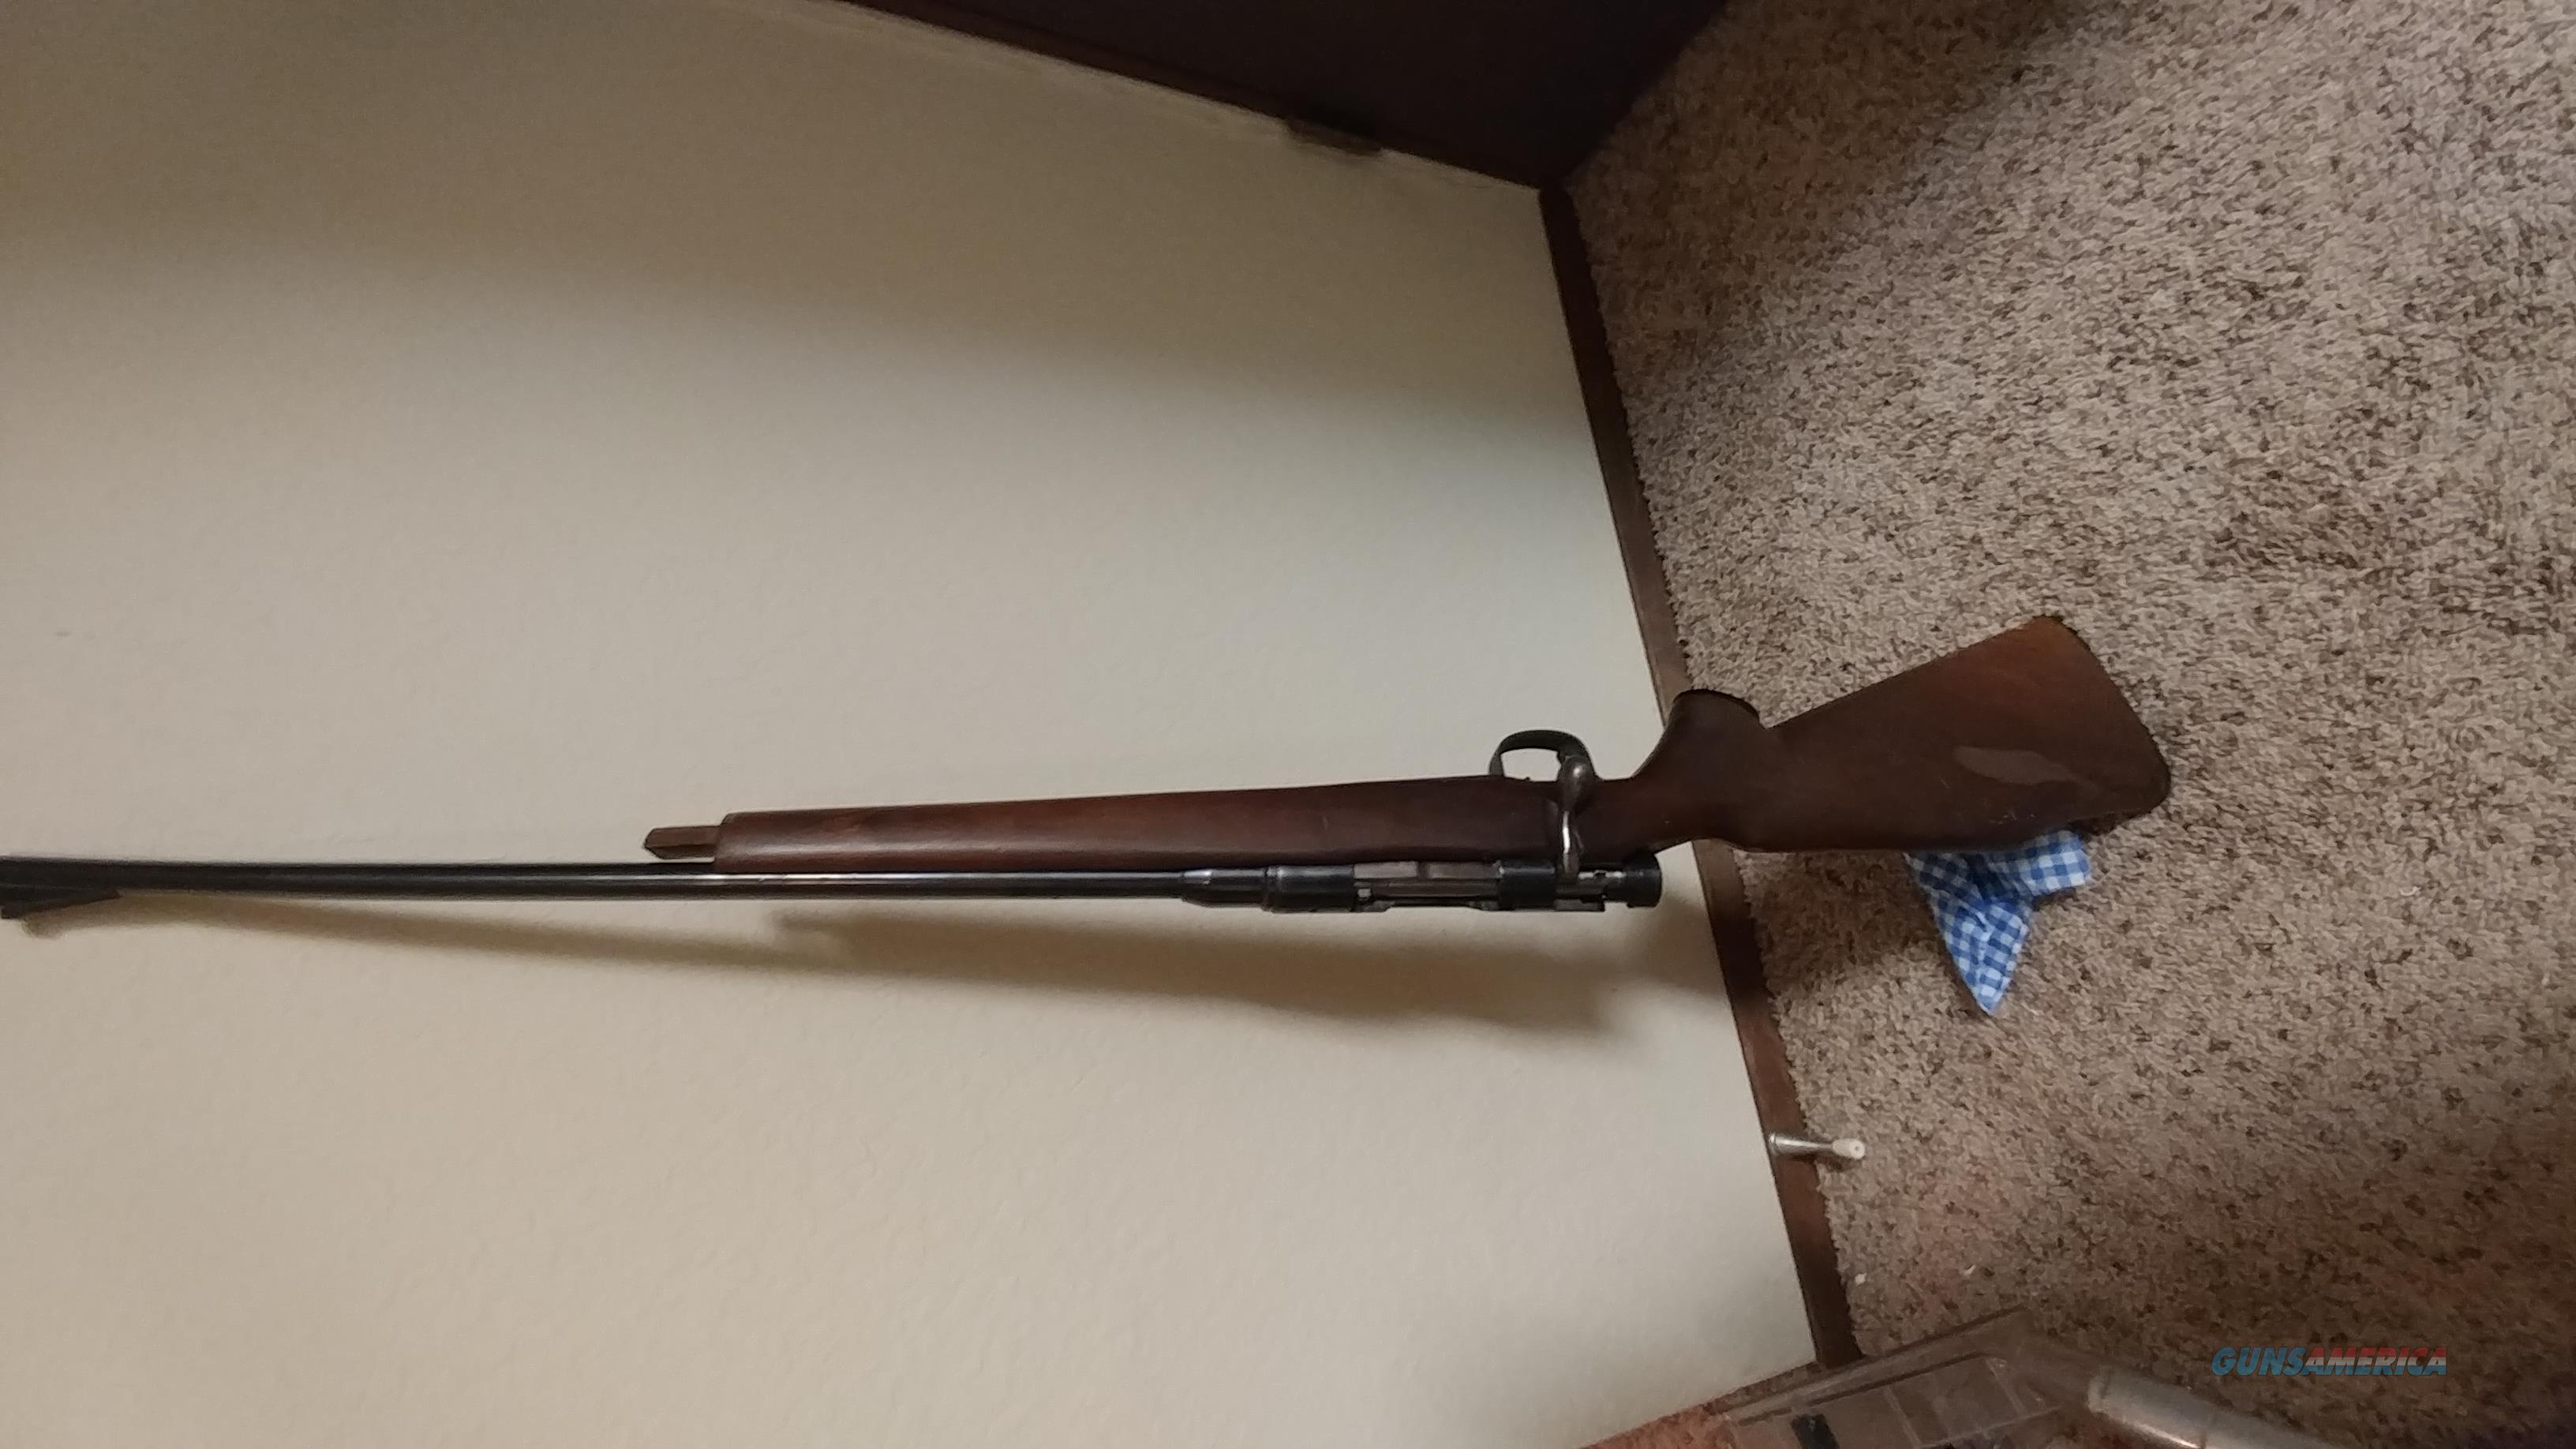 mounting a scope on a type 99 arisaka 7.7 jap